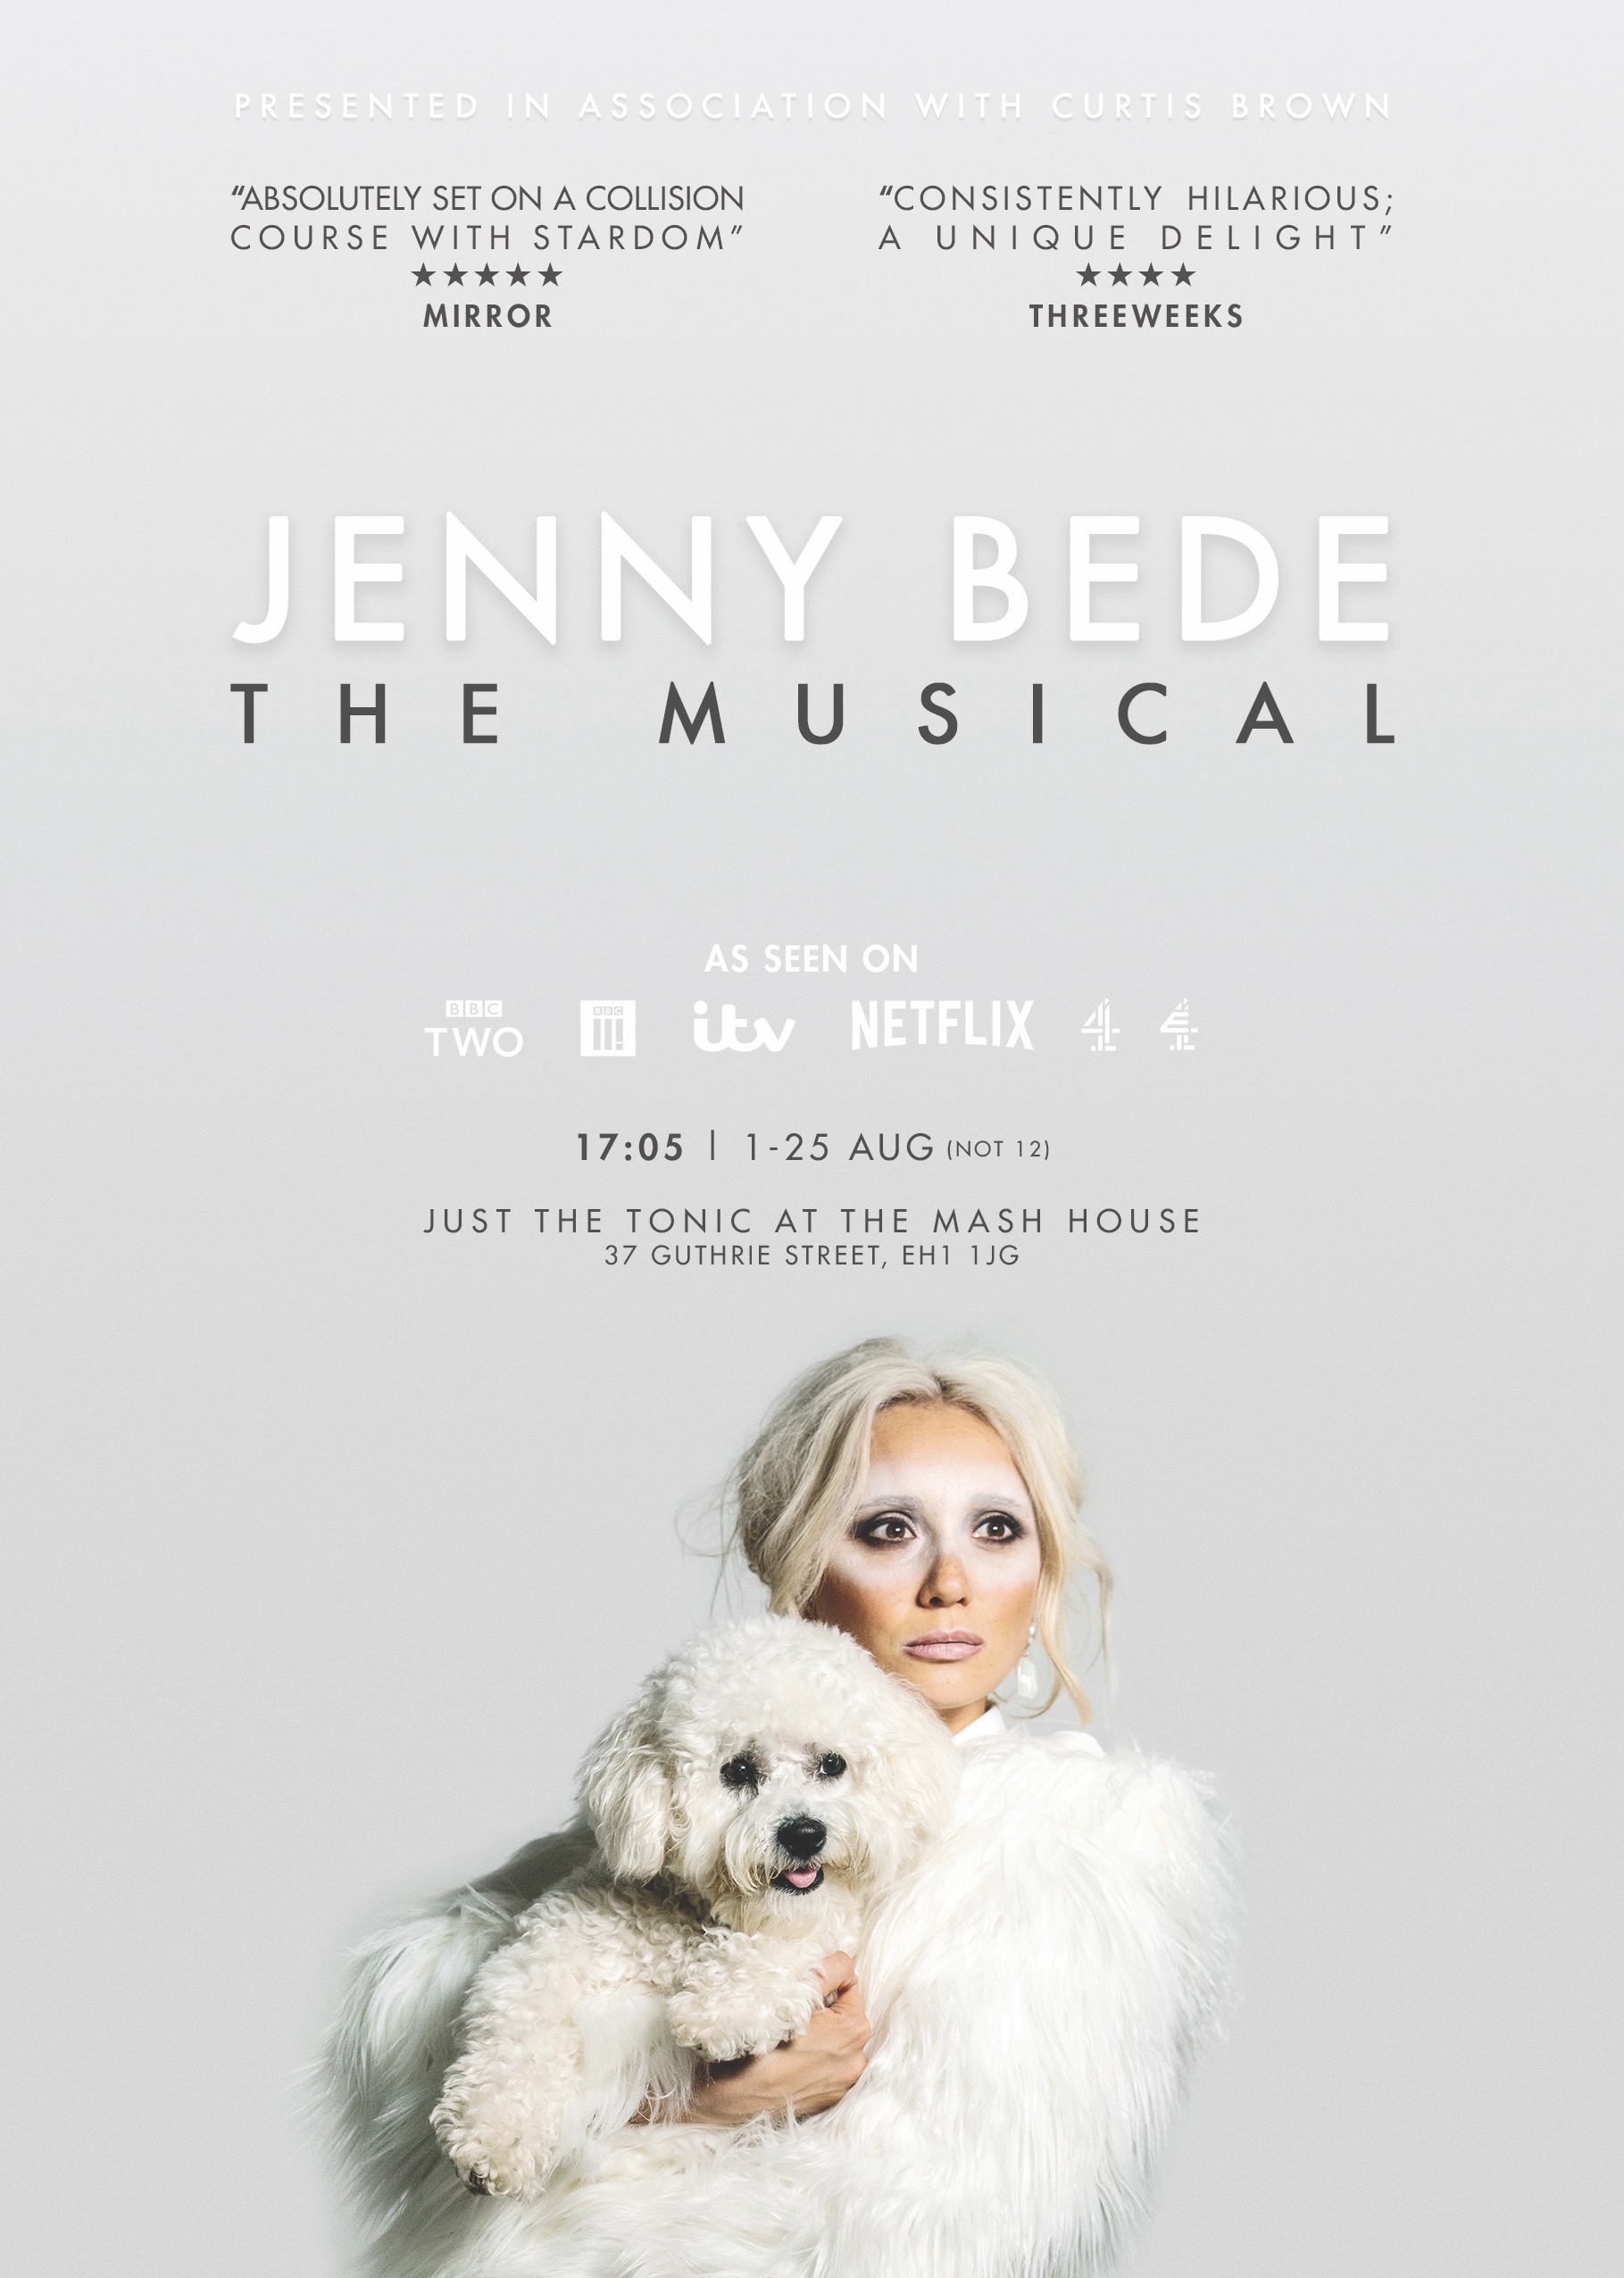 The poster for Jenny Bede: The Musical